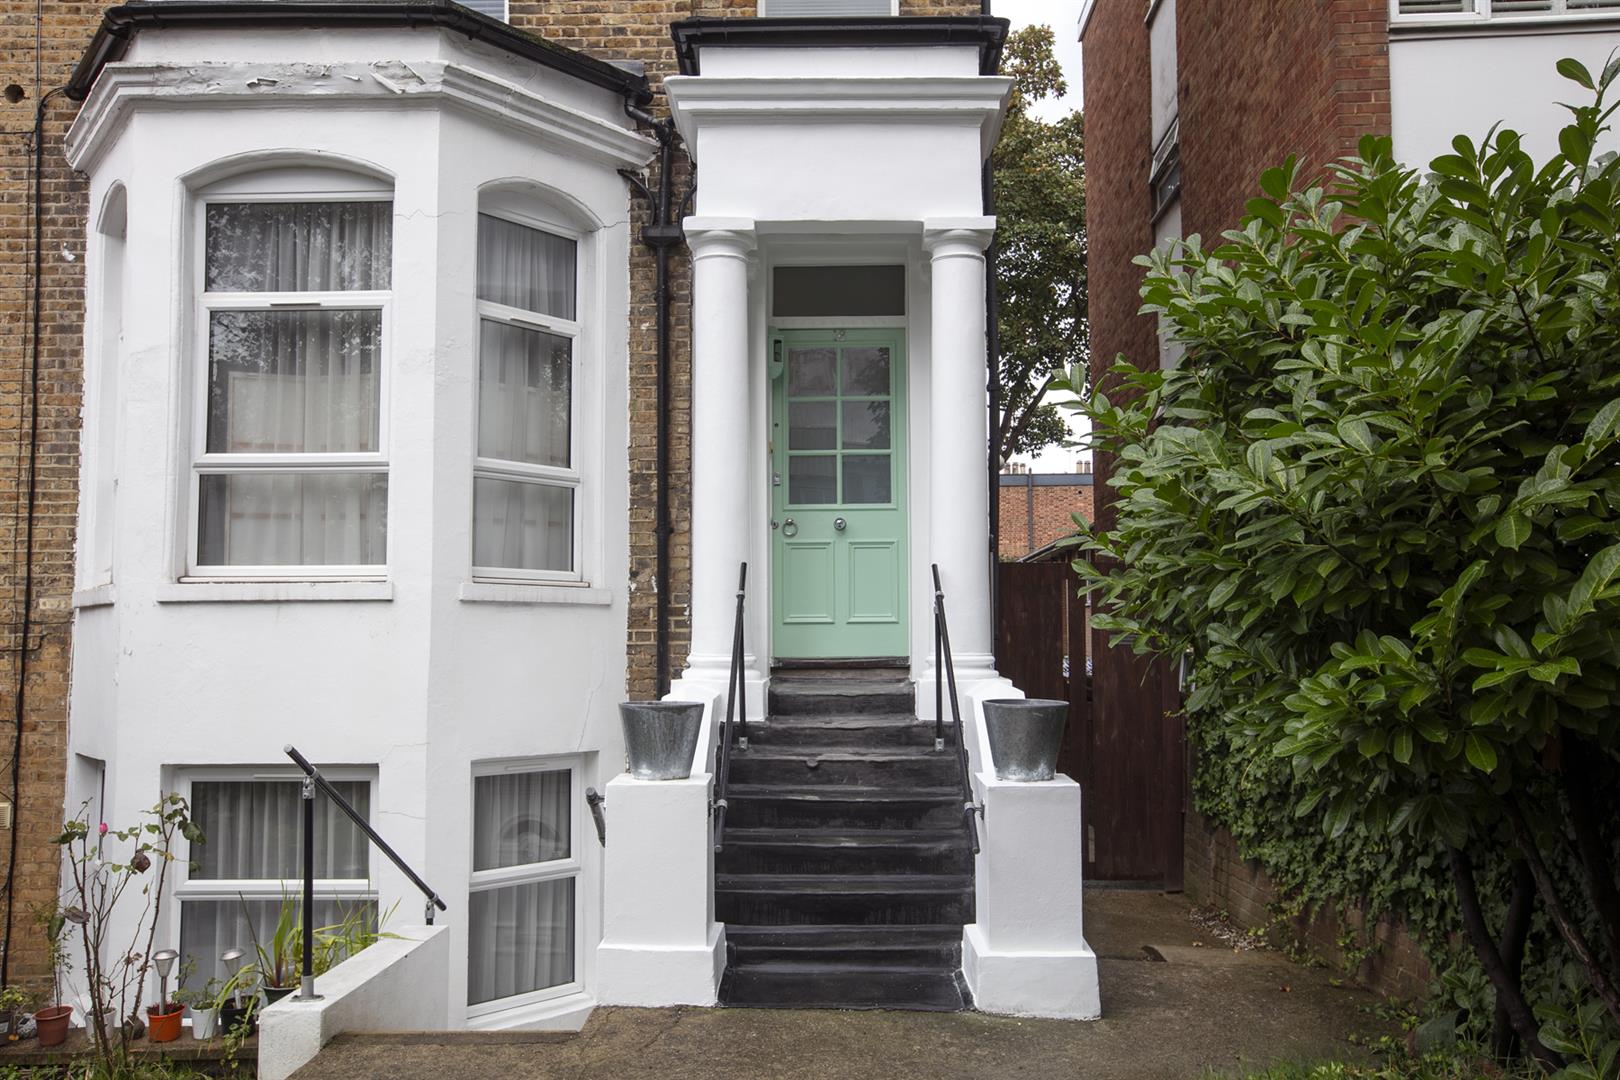 Flat - Conversion For Sale in East Dulwich Road, East Dulwich, SE22 1159 view16